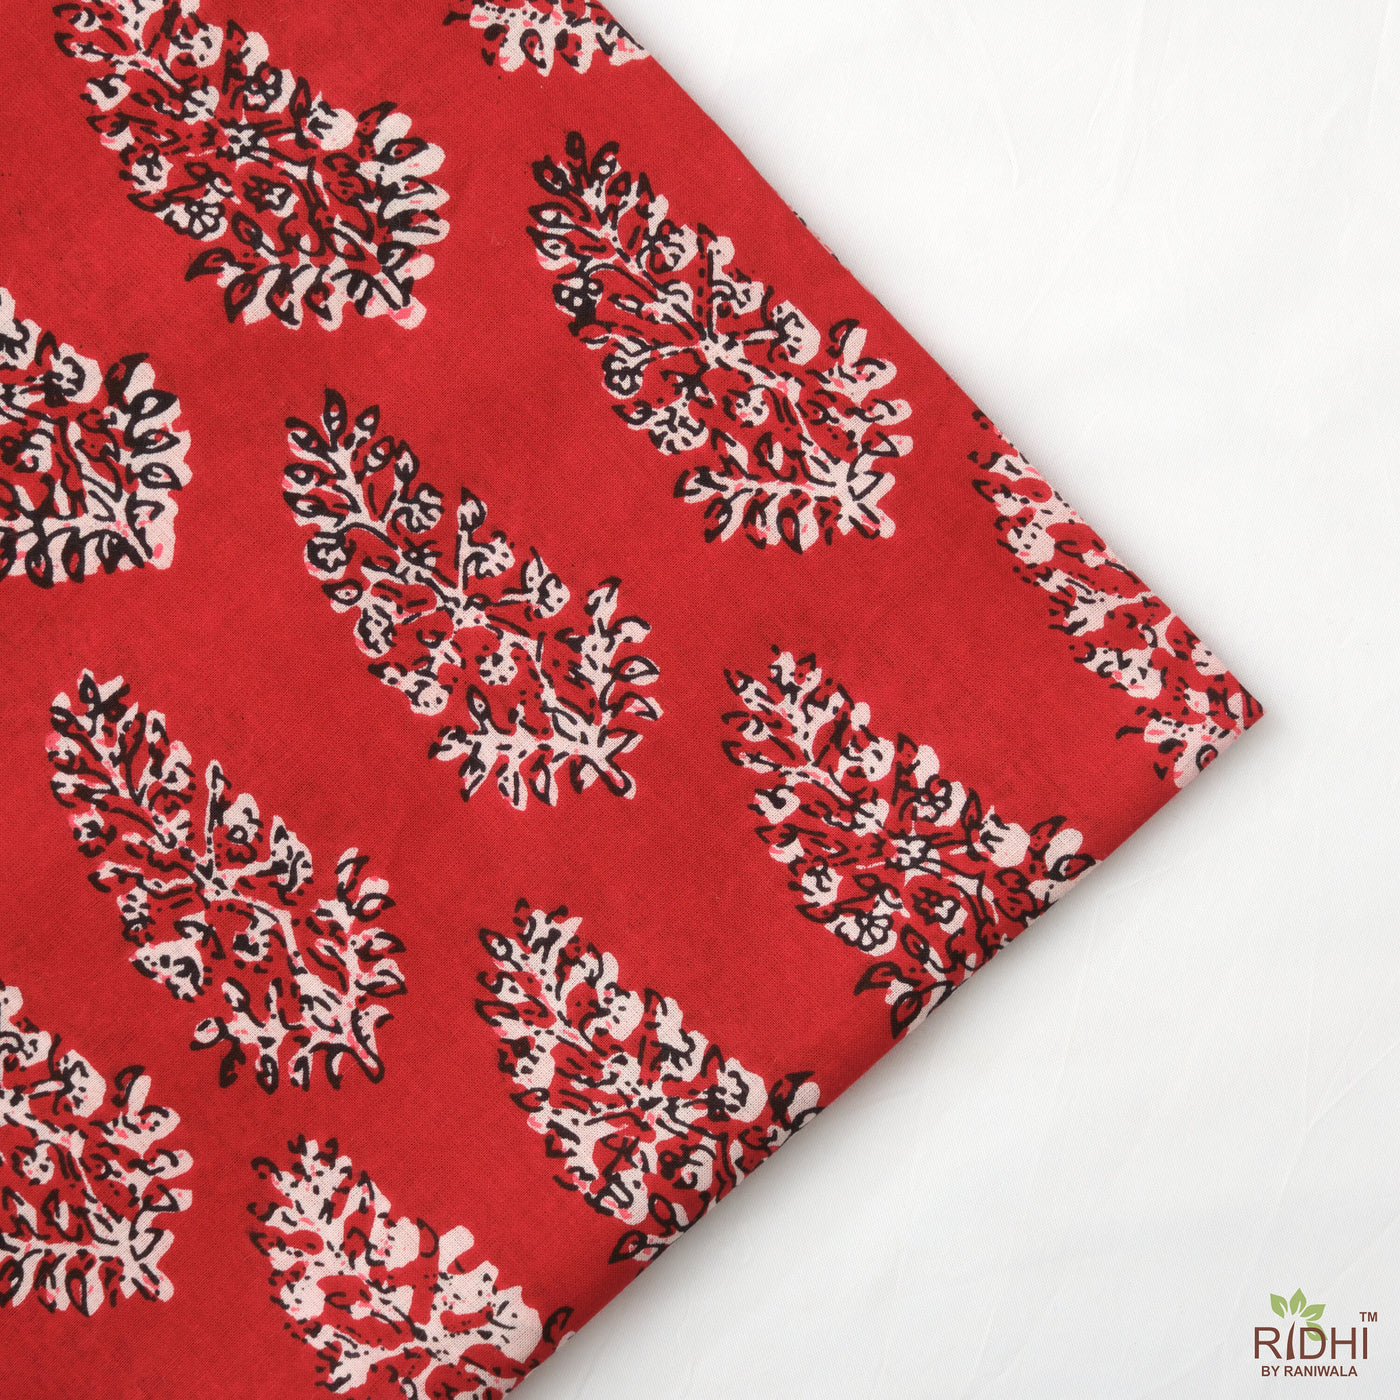 Light Blood Red, Black and White Indian Floral Printed 100% Pure Cotton Cloth Napkins, Gifts, 18x18"- Cocktail Napkins, 20x20"- Dinner Napkins